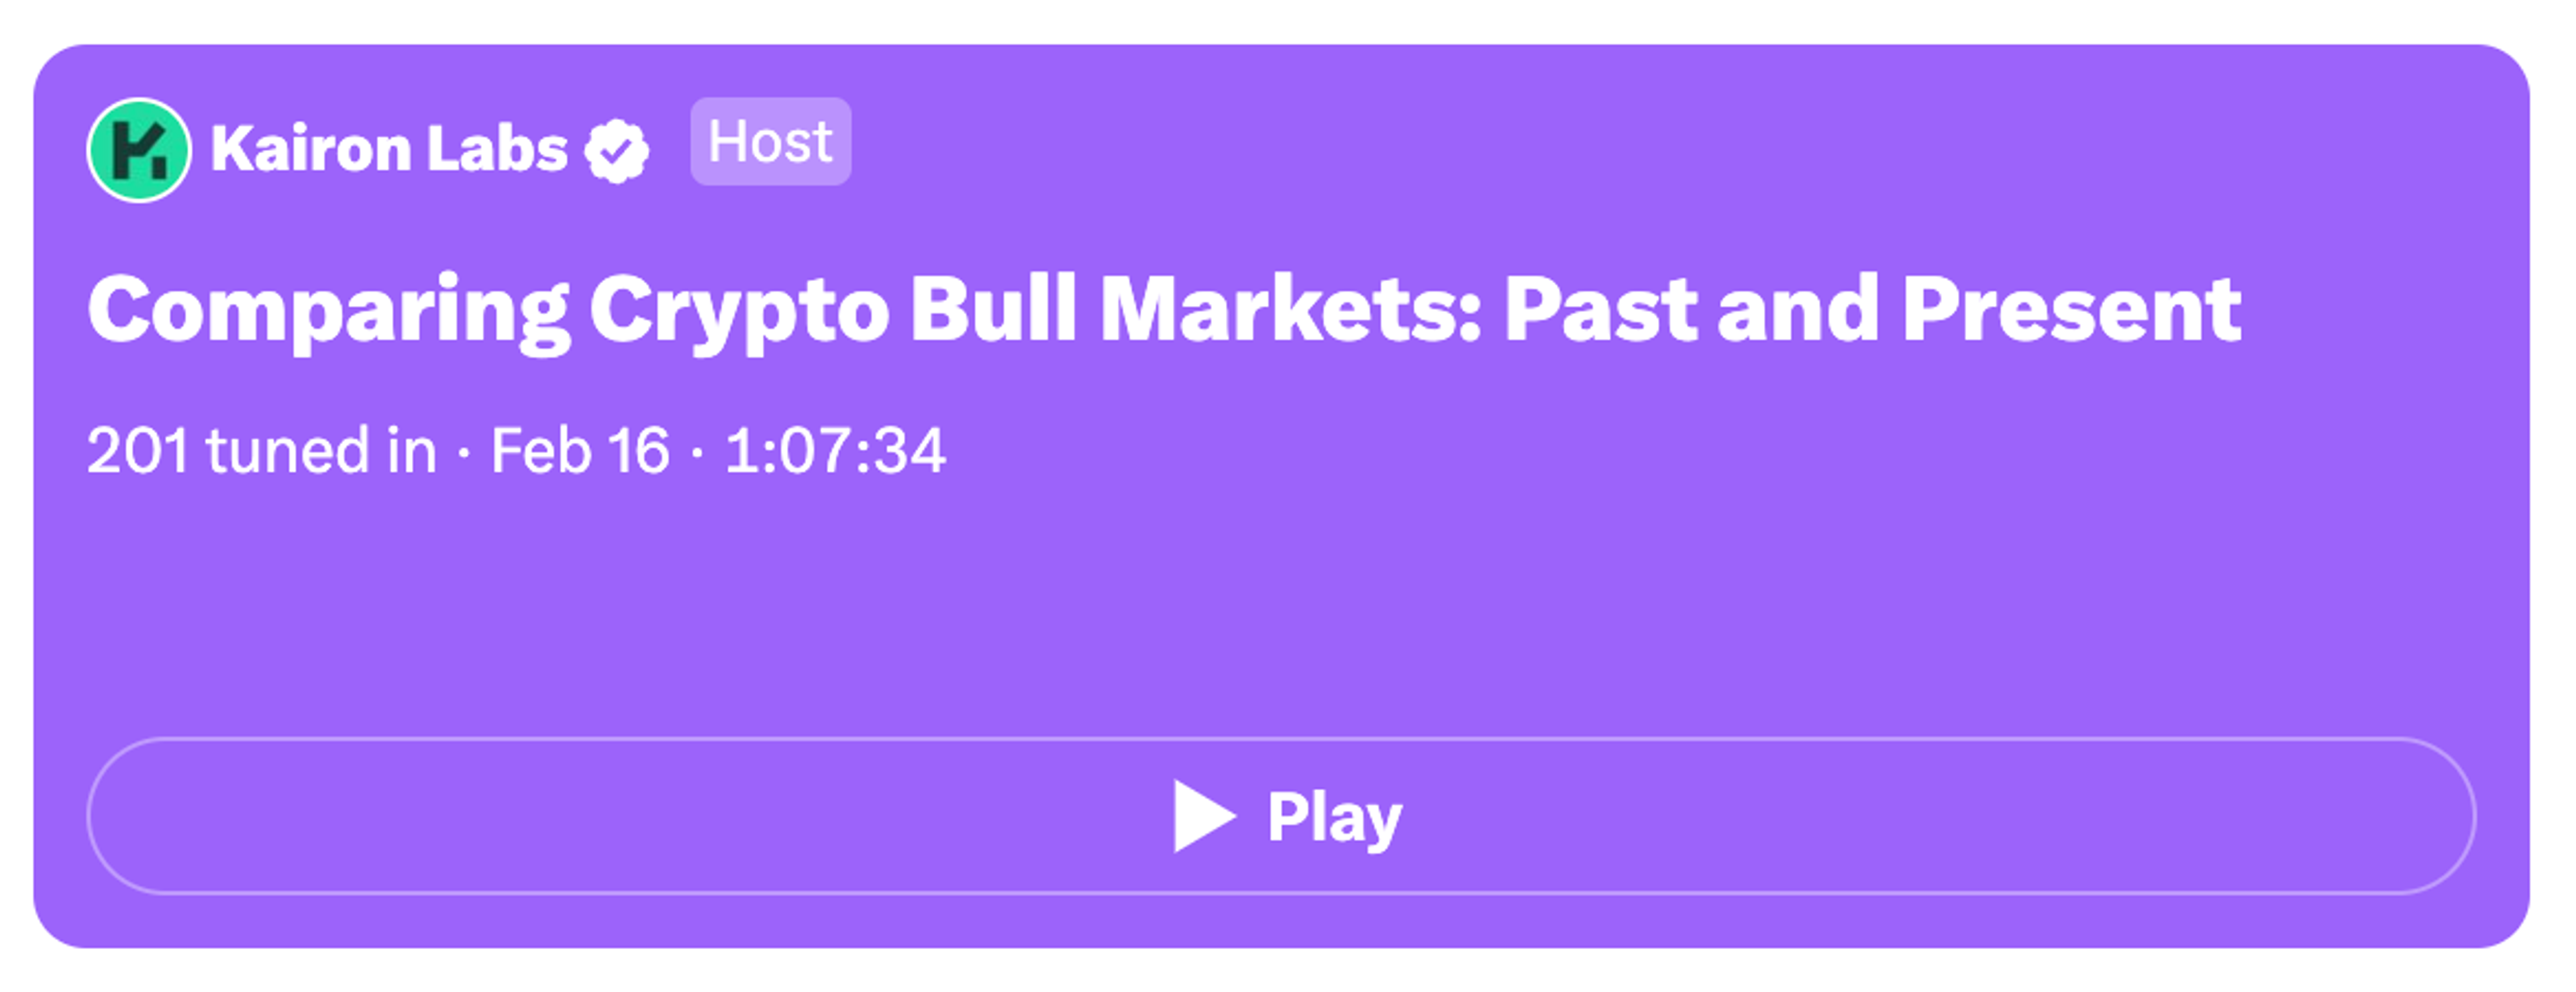 Comparing Crypto Bull Markets: Past and Present | Twitter Space by Kairon Labs